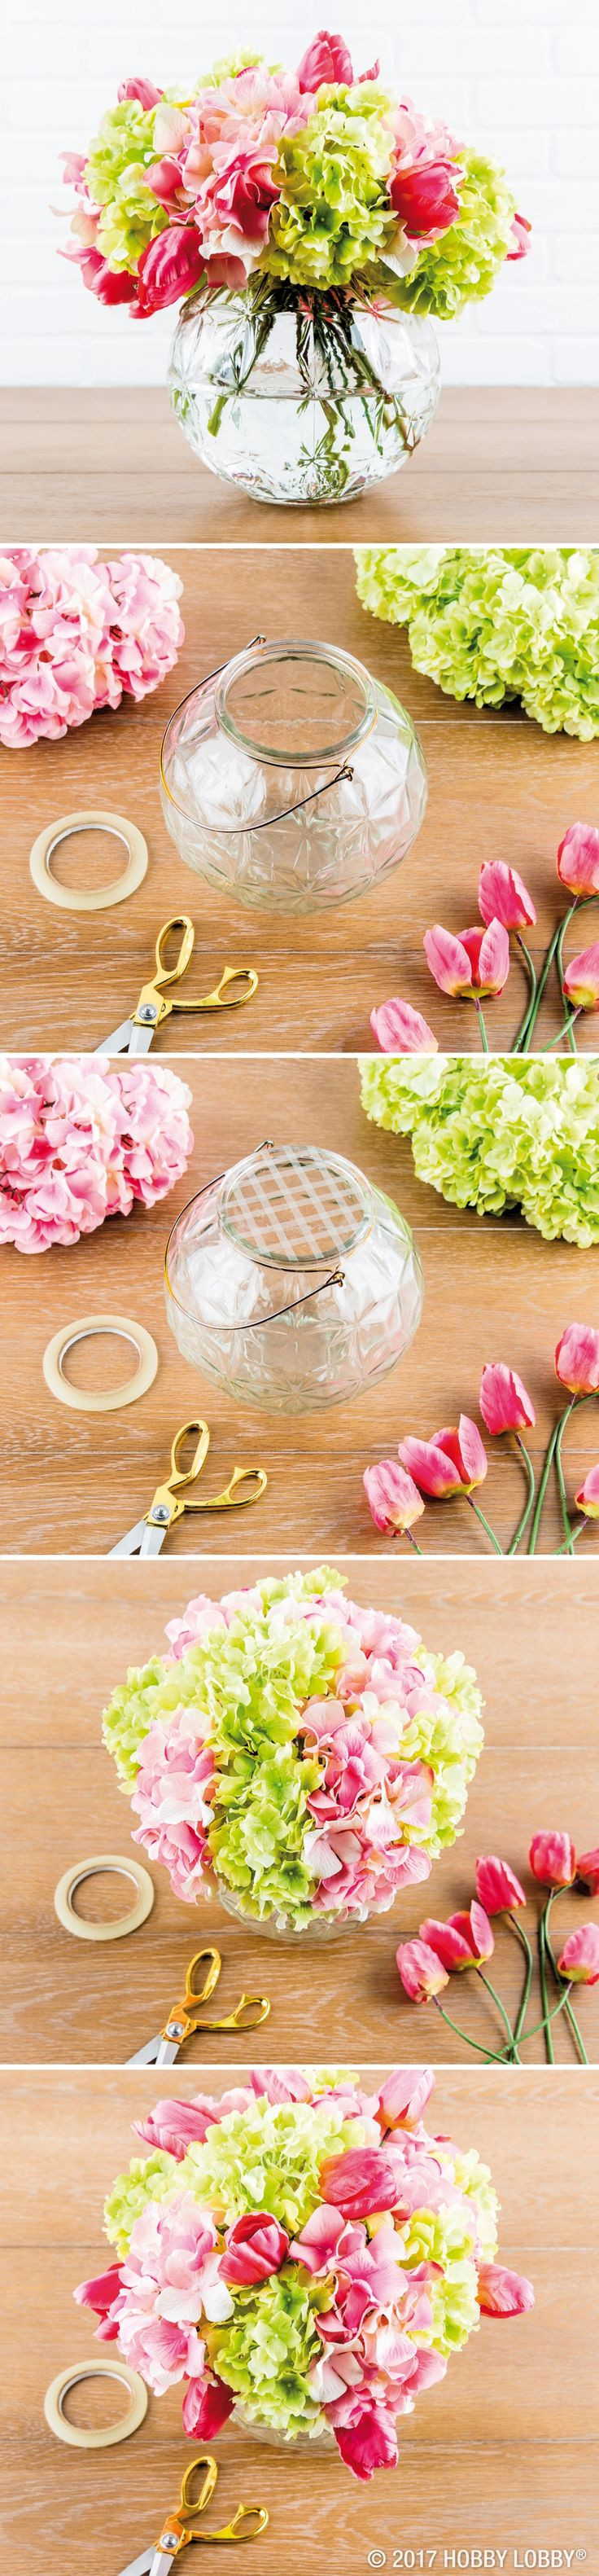 30 Wonderful Hobby Lobby Vases and Containers 2024 free download hobby lobby vases and containers of 834 best diy projects images on pinterest within bring life to your space with a diy faux floral arrangement first trim stems as needed next tape grid lin